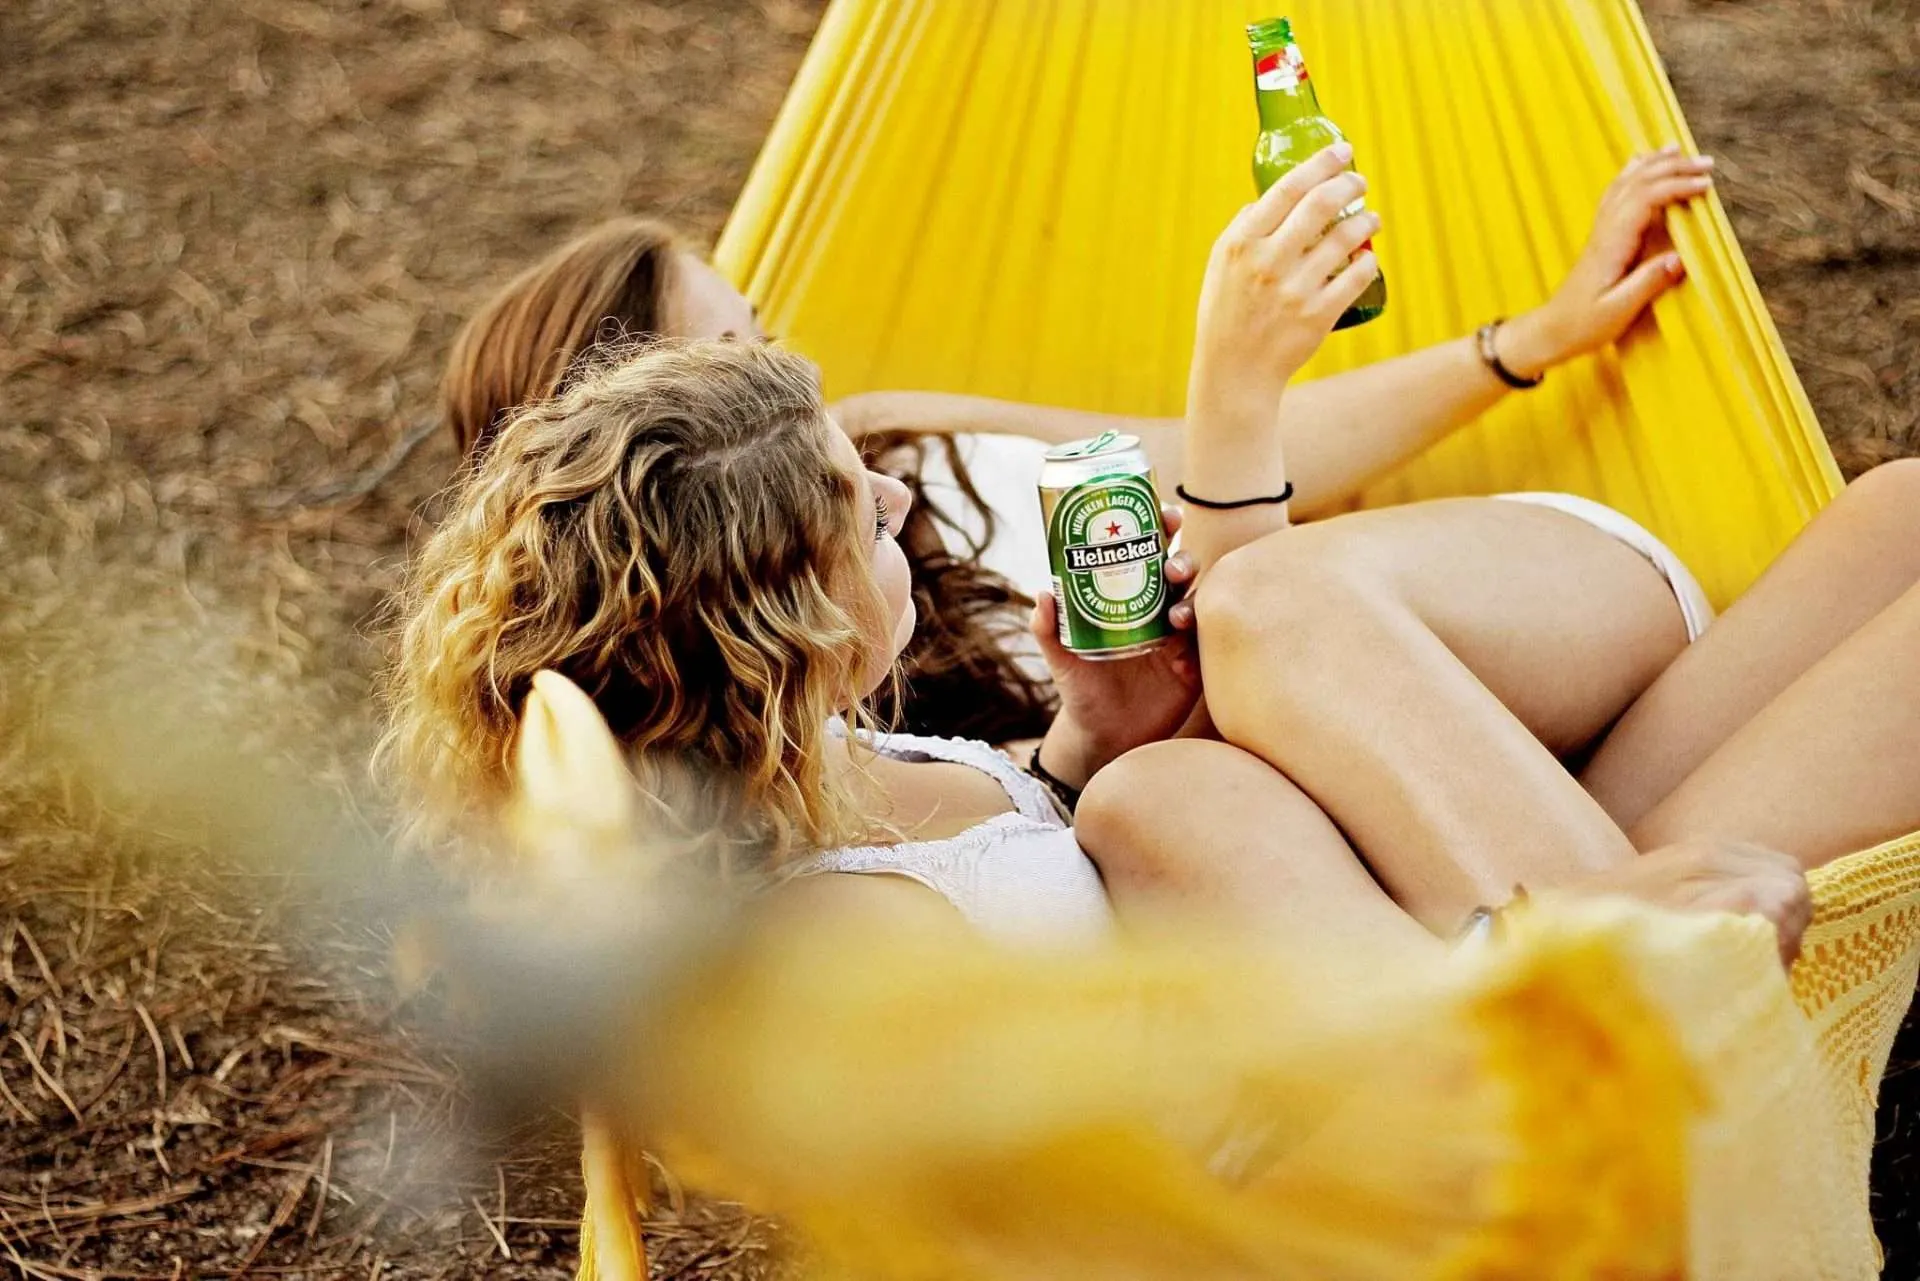 Two friends drinking beer in free-standing yellow hammock.